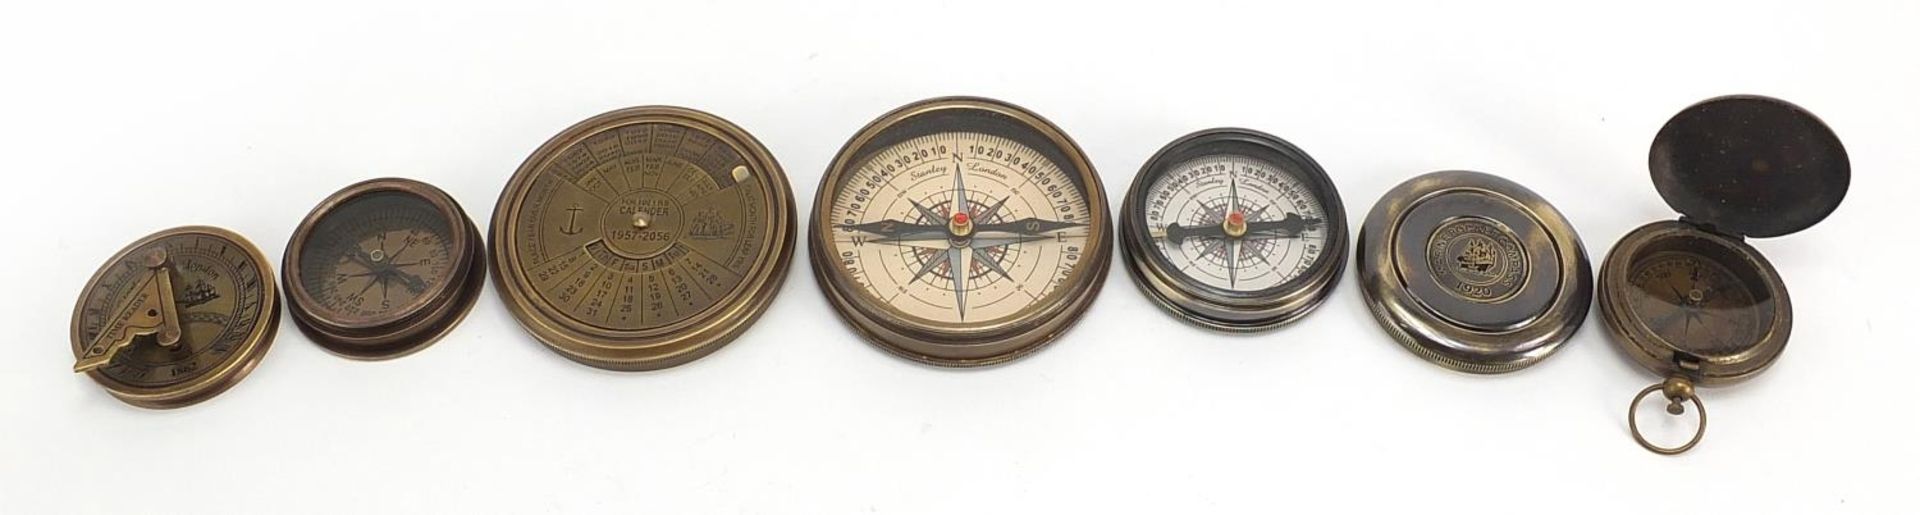 Four brass nautical interest compasses and sun dials, the largest 7.5cm in diameter